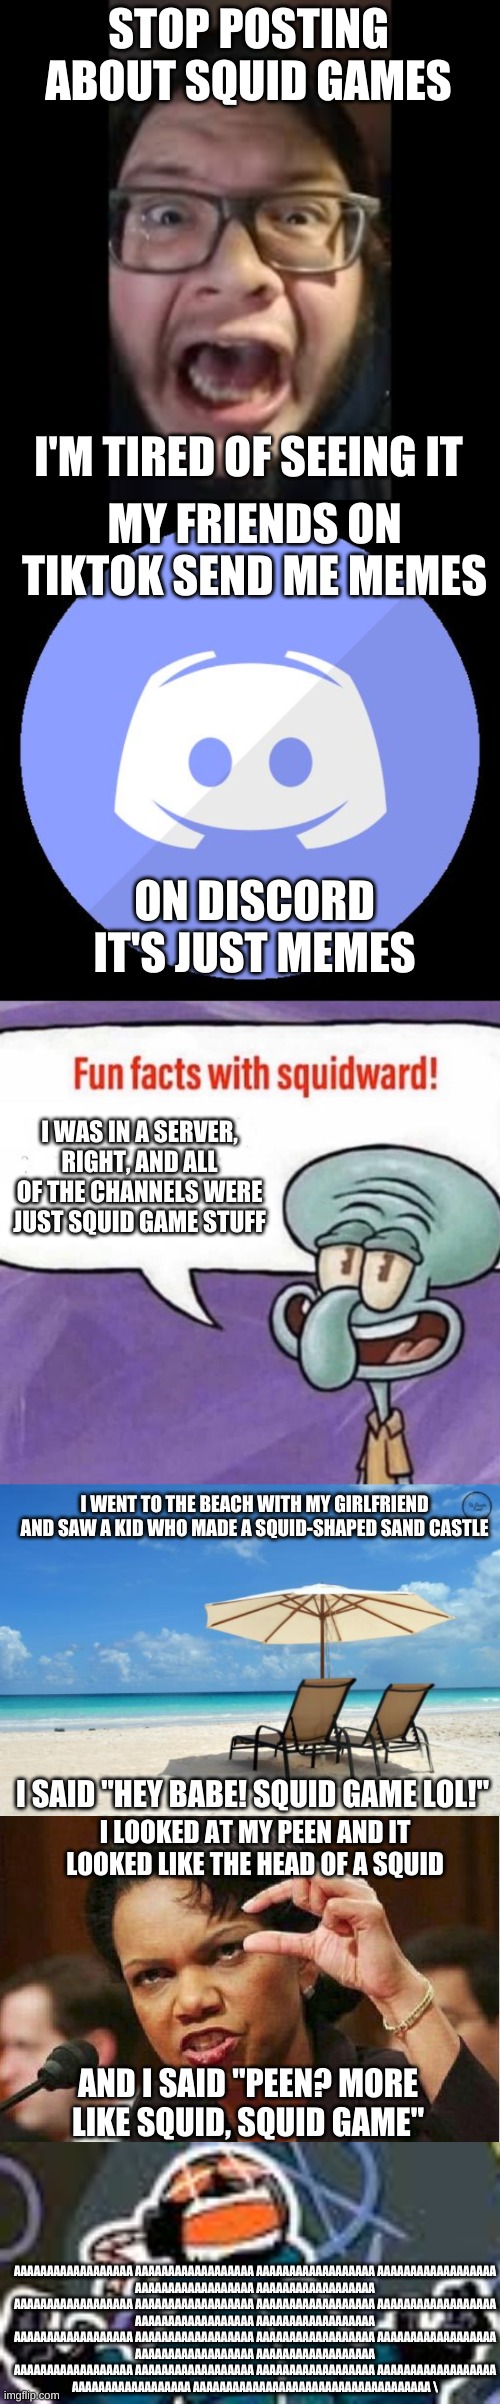 STOP. POSTING. ABOUT SQUID GAME | STOP POSTING ABOUT SQUID GAMES; I'M TIRED OF SEEING IT; MY FRIENDS ON TIKTOK SEND ME MEMES; ON DISCORD IT'S JUST MEMES; I WAS IN A SERVER, RIGHT, AND ALL OF THE CHANNELS WERE JUST SQUID GAME STUFF; I WENT TO THE BEACH WITH MY GIRLFRIEND AND SAW A KID WHO MADE A SQUID-SHAPED SAND CASTLE; I SAID "HEY BABE! SQUID GAME LOL!"; I LOOKED AT MY PEEN AND IT LOOKED LIKE THE HEAD OF A SQUID; AND I SAID "PEEN? MORE LIKE SQUID, SQUID GAME"; AAAAAAAAAAAAAAAAAA AAAAAAAAAAAAAAAAAA AAAAAAAAAAAAAAAAAA AAAAAAAAAAAAAAAAAA
AAAAAAAAAAAAAAAAAA AAAAAAAAAAAAAAAAAA
AAAAAAAAAAAAAAAAAA AAAAAAAAAAAAAAAAAA AAAAAAAAAAAAAAAAAA AAAAAAAAAAAAAAAAAA
AAAAAAAAAAAAAAAAAA AAAAAAAAAAAAAAAAAA
AAAAAAAAAAAAAAAAAA AAAAAAAAAAAAAAAAAA AAAAAAAAAAAAAAAAAA AAAAAAAAAAAAAAAAAA
AAAAAAAAAAAAAAAAAA AAAAAAAAAAAAAAAAAA
AAAAAAAAAAAAAAAAAA AAAAAAAAAAAAAAAAAA AAAAAAAAAAAAAAAAAA AAAAAAAAAAAAAAAAAA
AAAAAAAAAAAAAAAAAA AAAAAAAAAAAAAAAAAAAAAAAAAAAAAAAAAAAA \ | image tagged in stop posting about among us,discord,squid game,stop posting about squid game,barney will eat all of your delectable biscuits | made w/ Imgflip meme maker